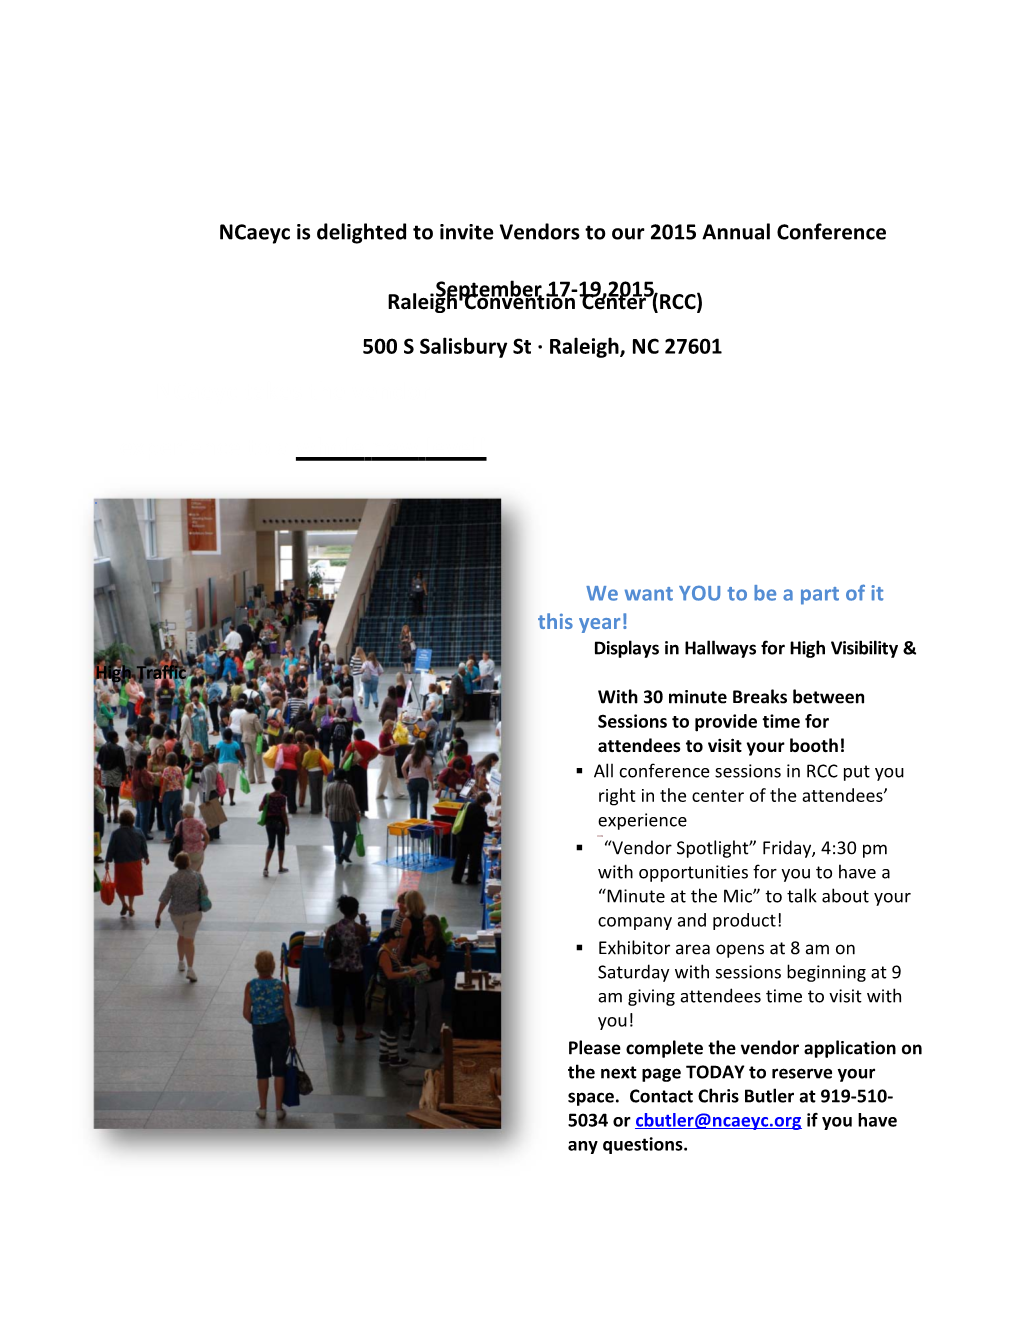 Ncaeycis Delightedtoinvitevendorstoour 2015 Annual Conference